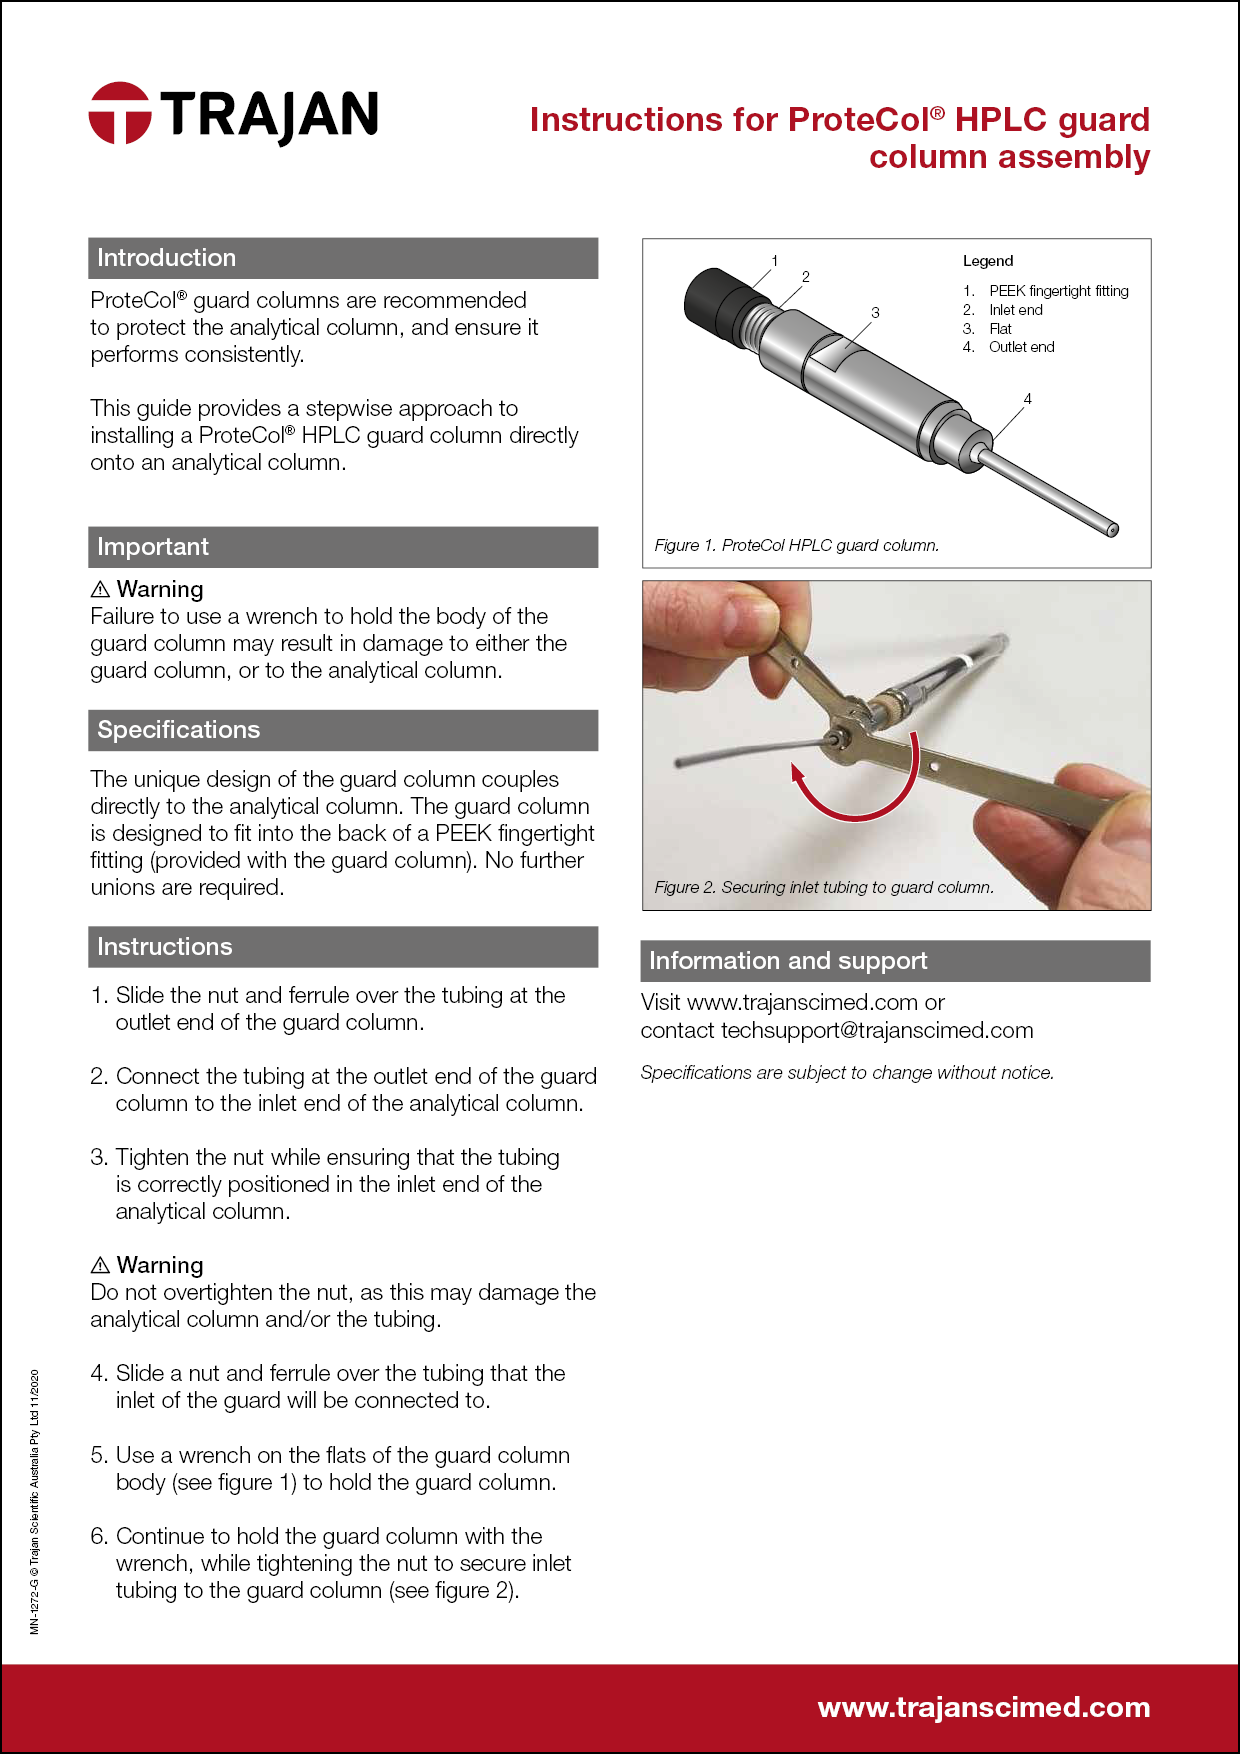 Manual - Instructions for ProteCol HPLC guard column assembly